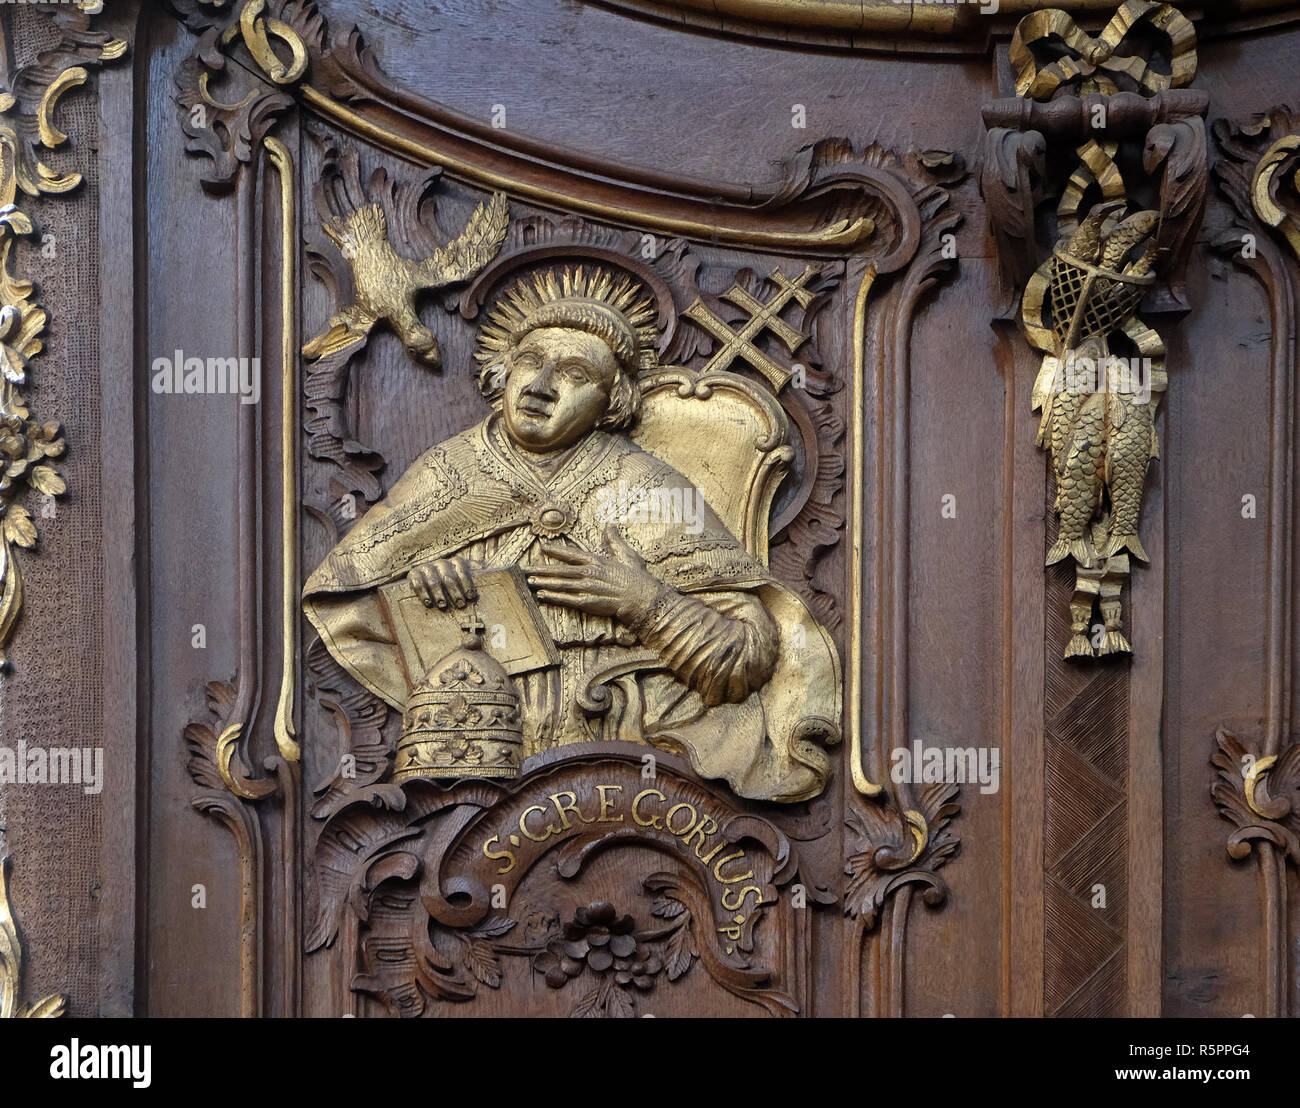 Saint Gregory the Great, one of the Latin Fathers of the Church, choir stalls by Daniel Aschauer in Cistercian Abbey of Bronbach in Reicholzheim near  Stock Photo